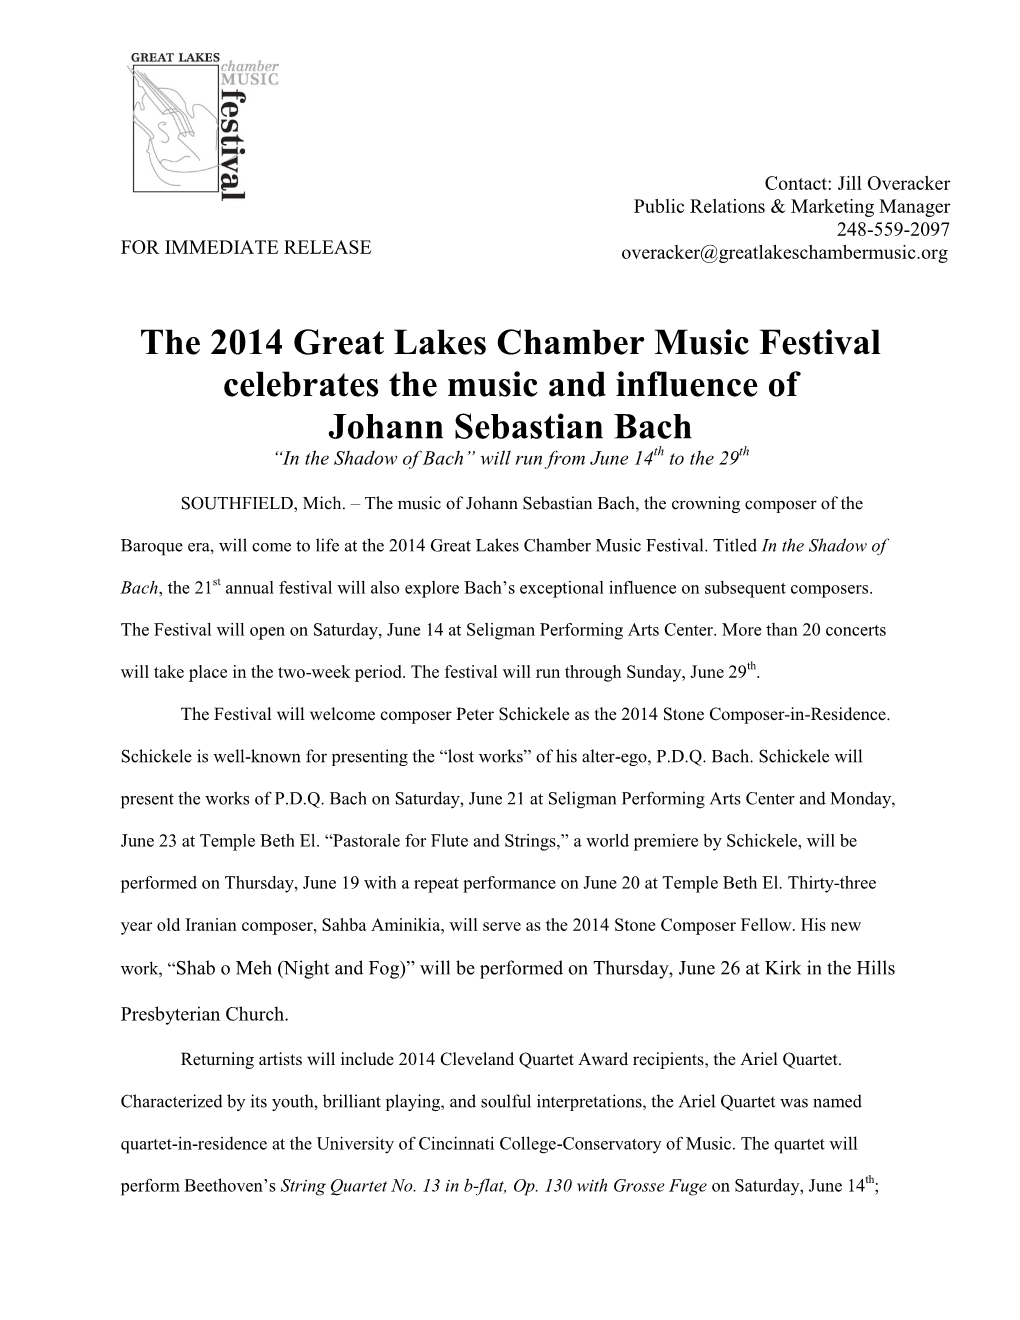 The 2014 Great Lakes Festival Celebrates the Music and Influence